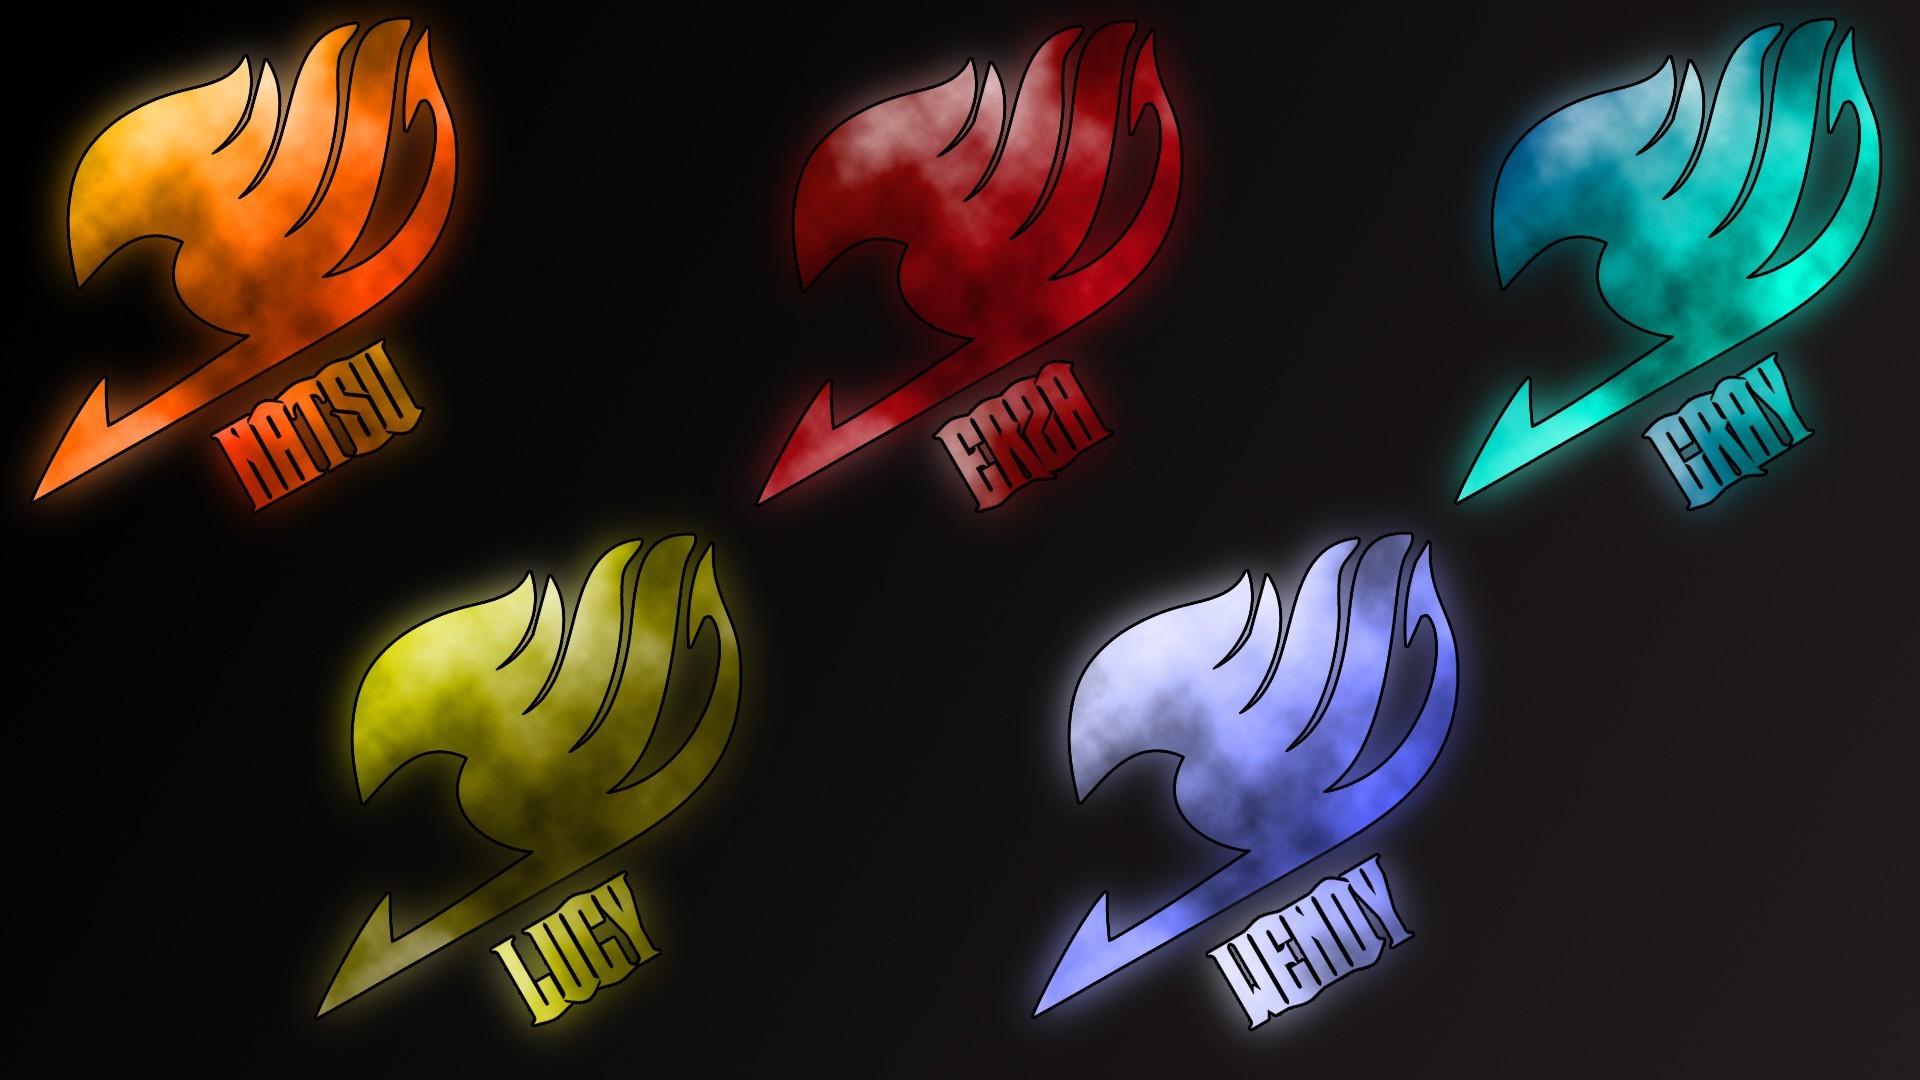 1920x1080 Anime Fairy Tail Logo In Many Colors Wallpaper Fairy Tail Wallpaper